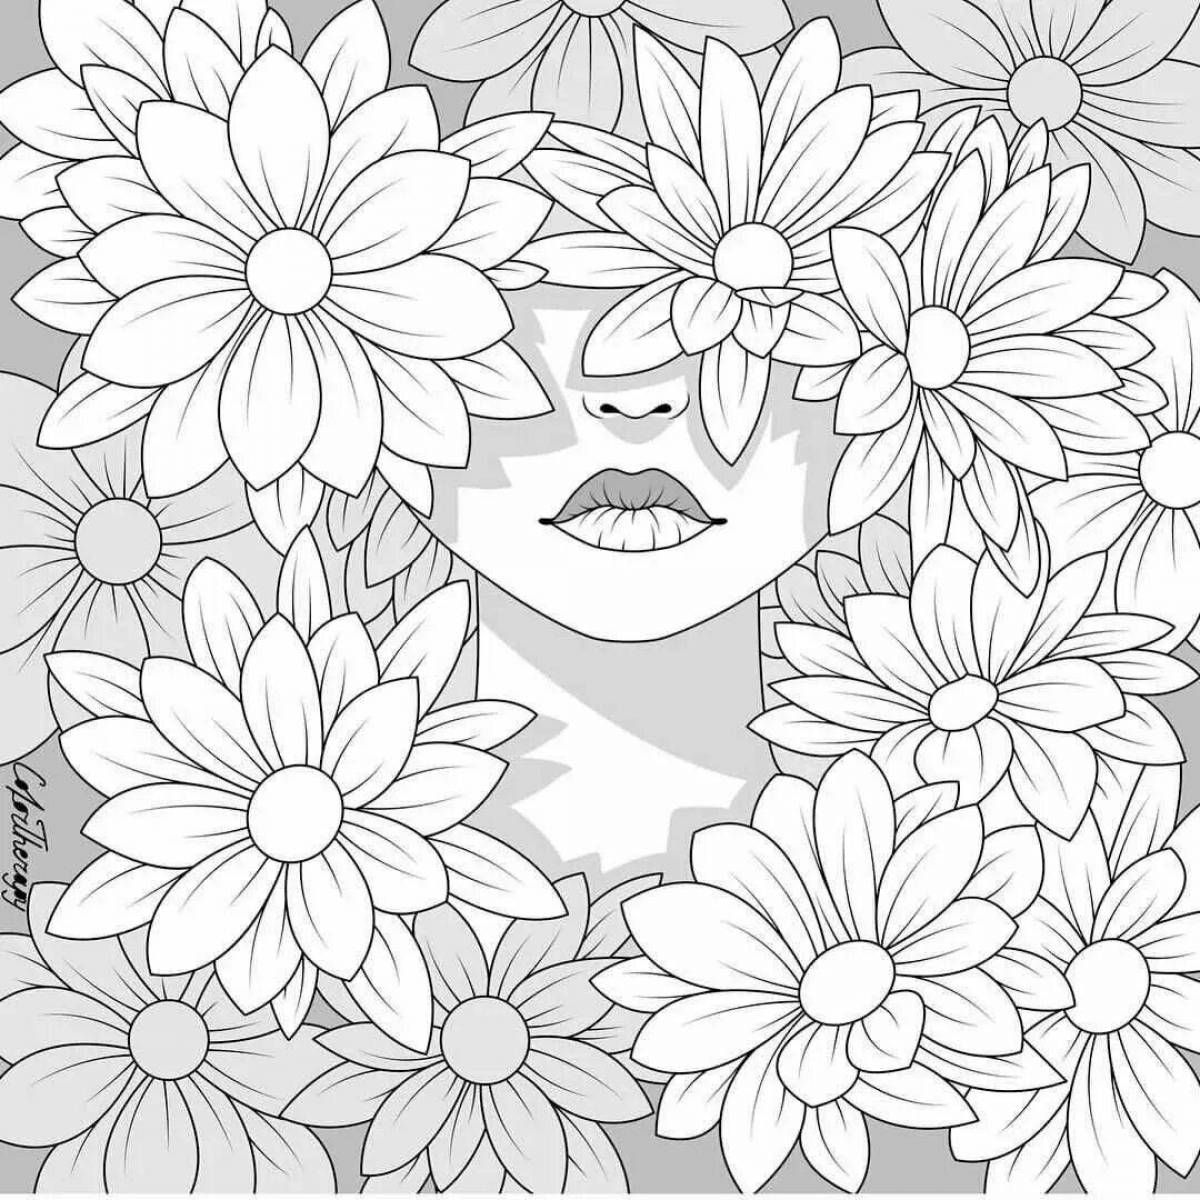 Calming wildberry anti-stress coloring page